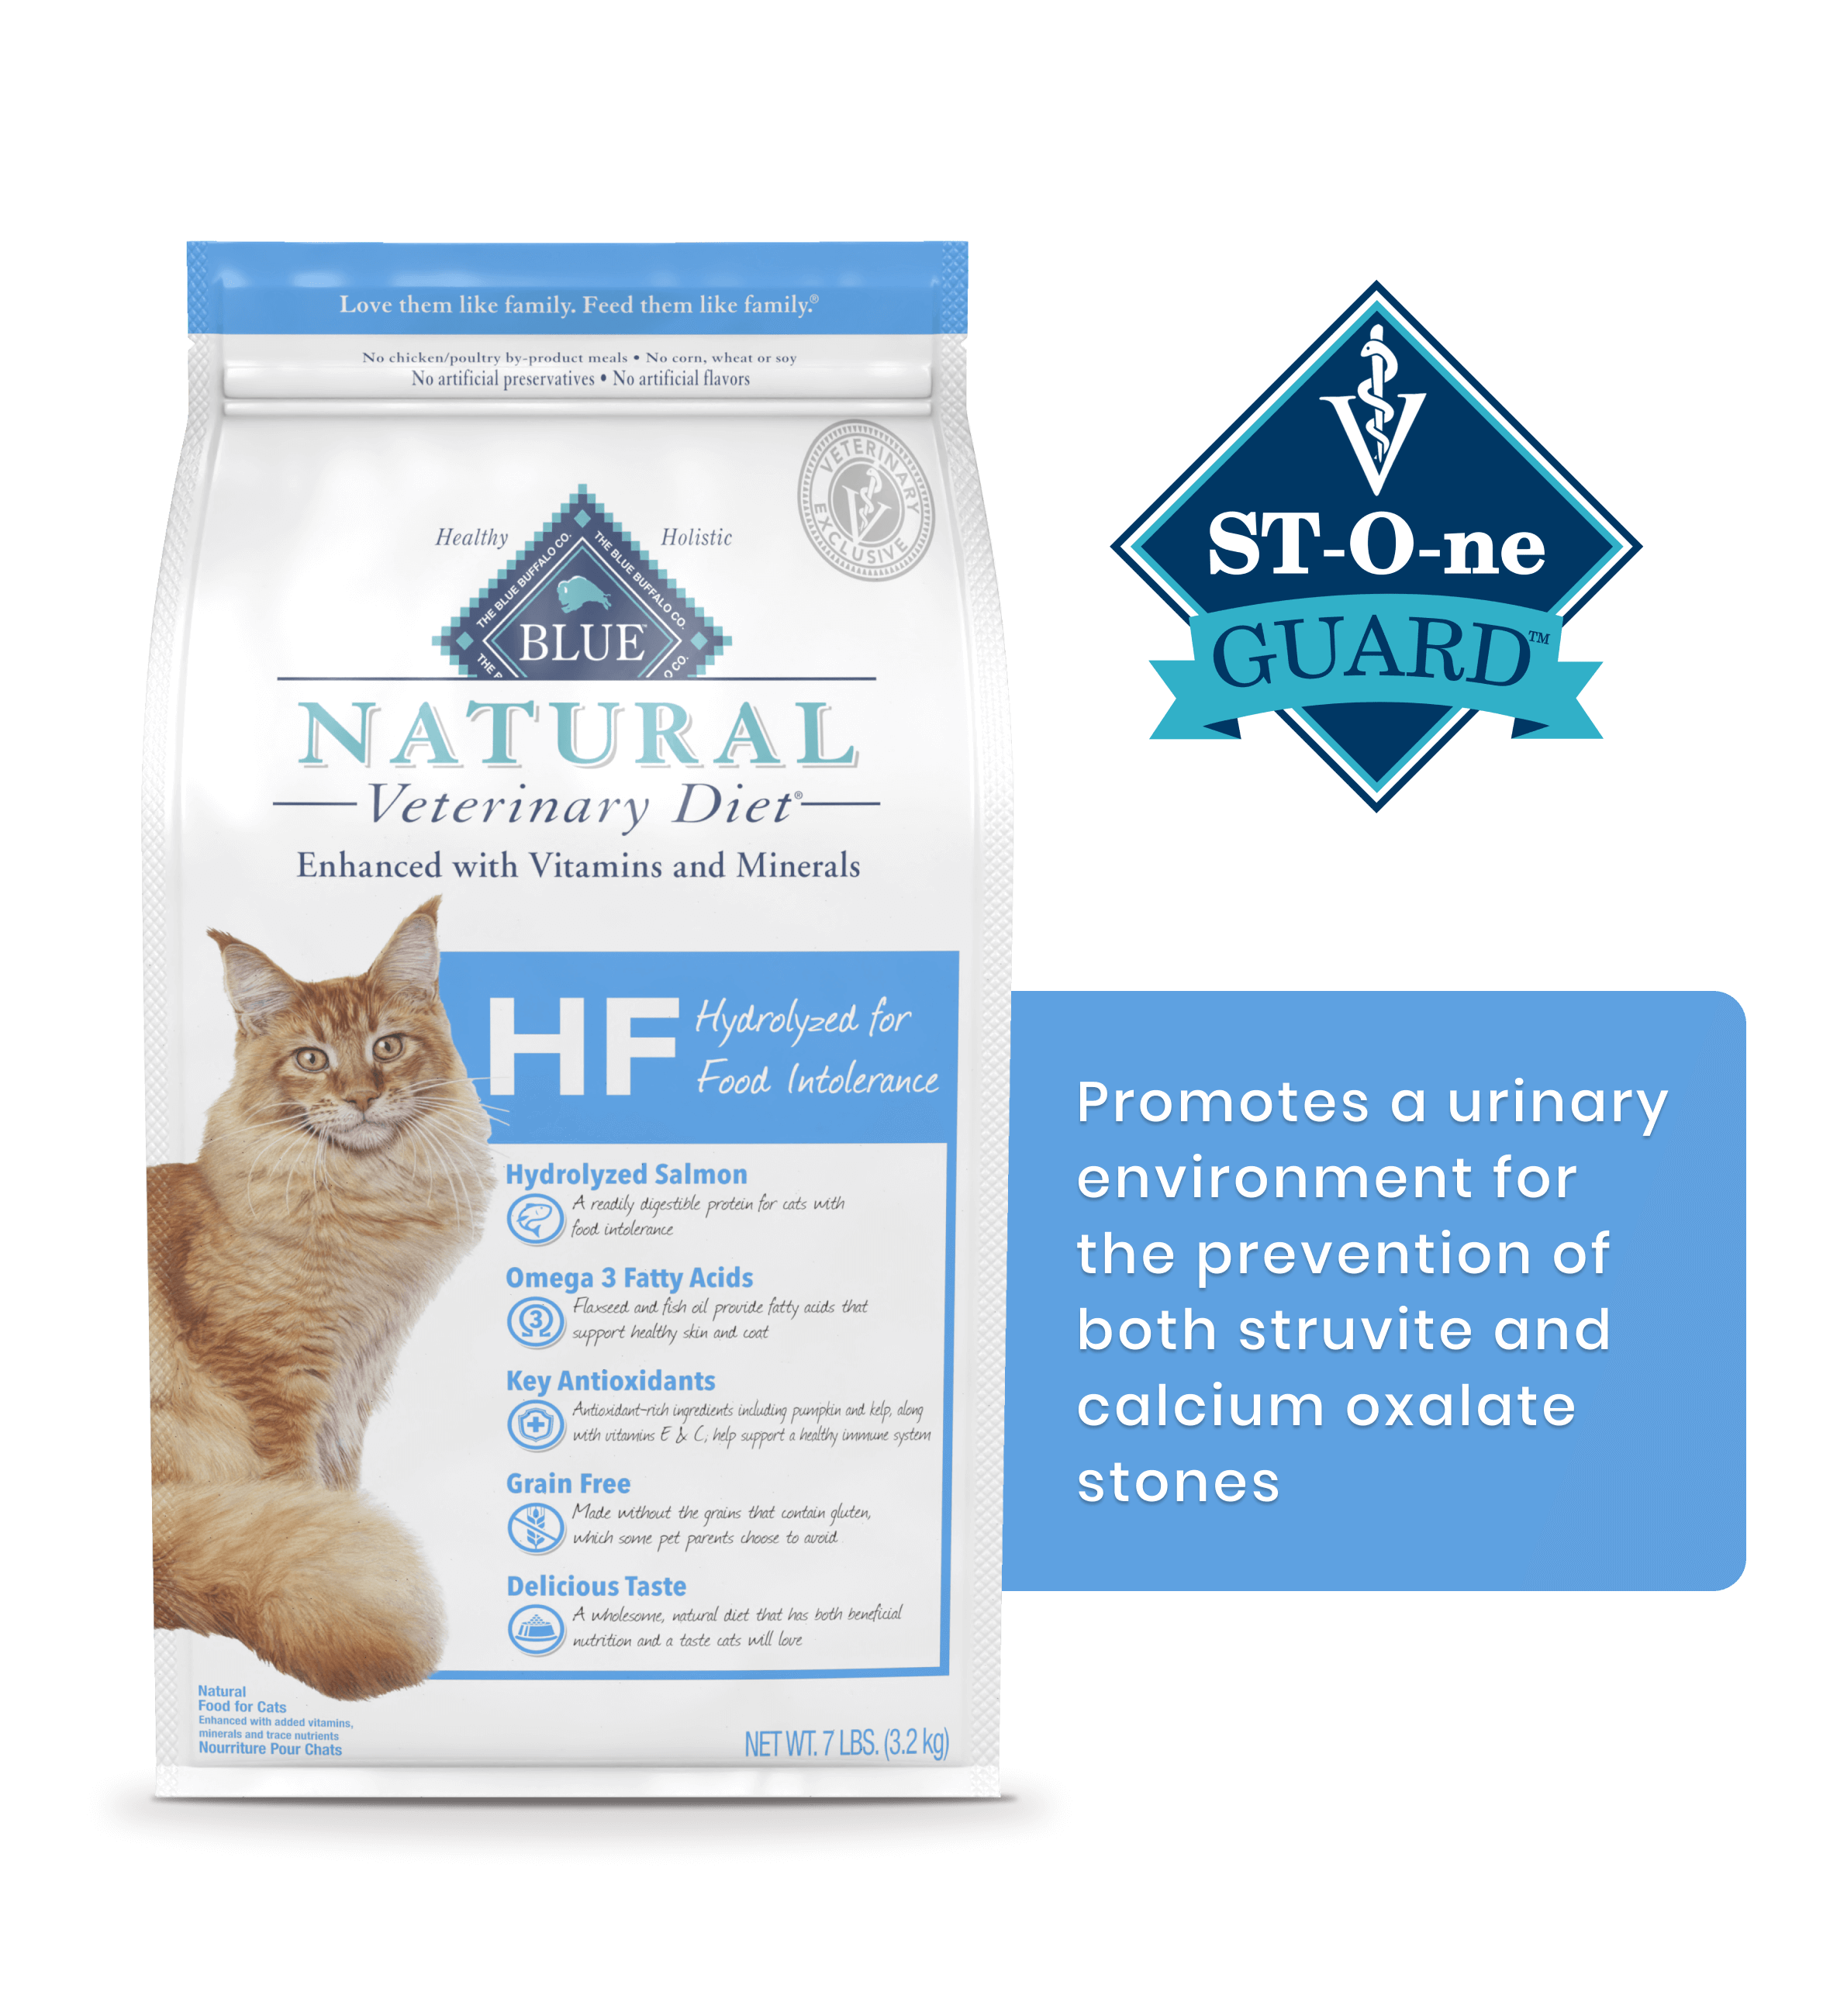 HF Hydrolyzed for Food Intolerance St-O-ne Guard  Promotes a urinary environment for the prevention of both struvite and calcium oxalate stones